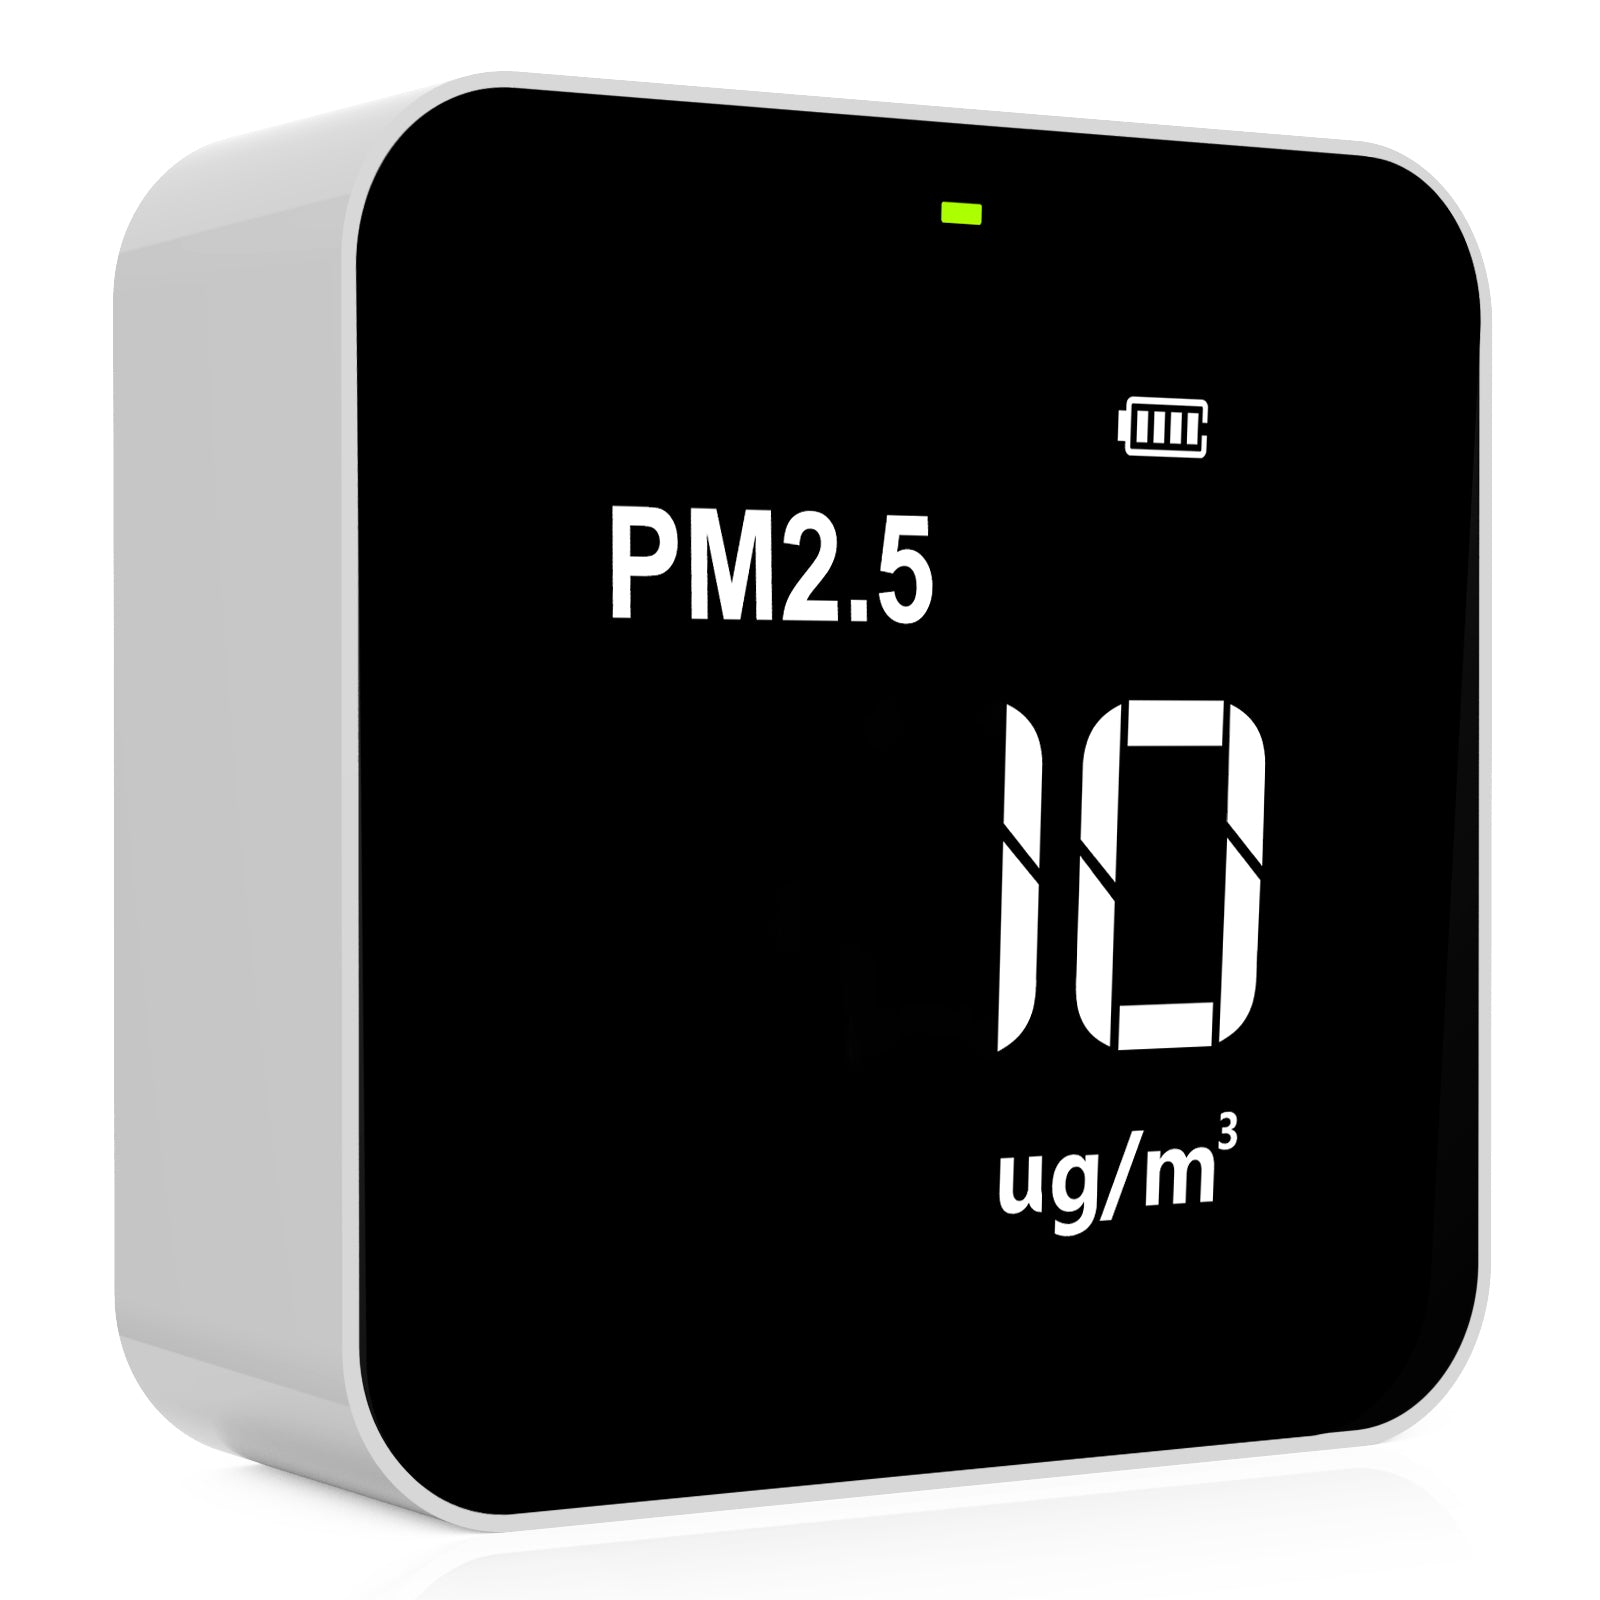 Real-Time Air Quality Detector